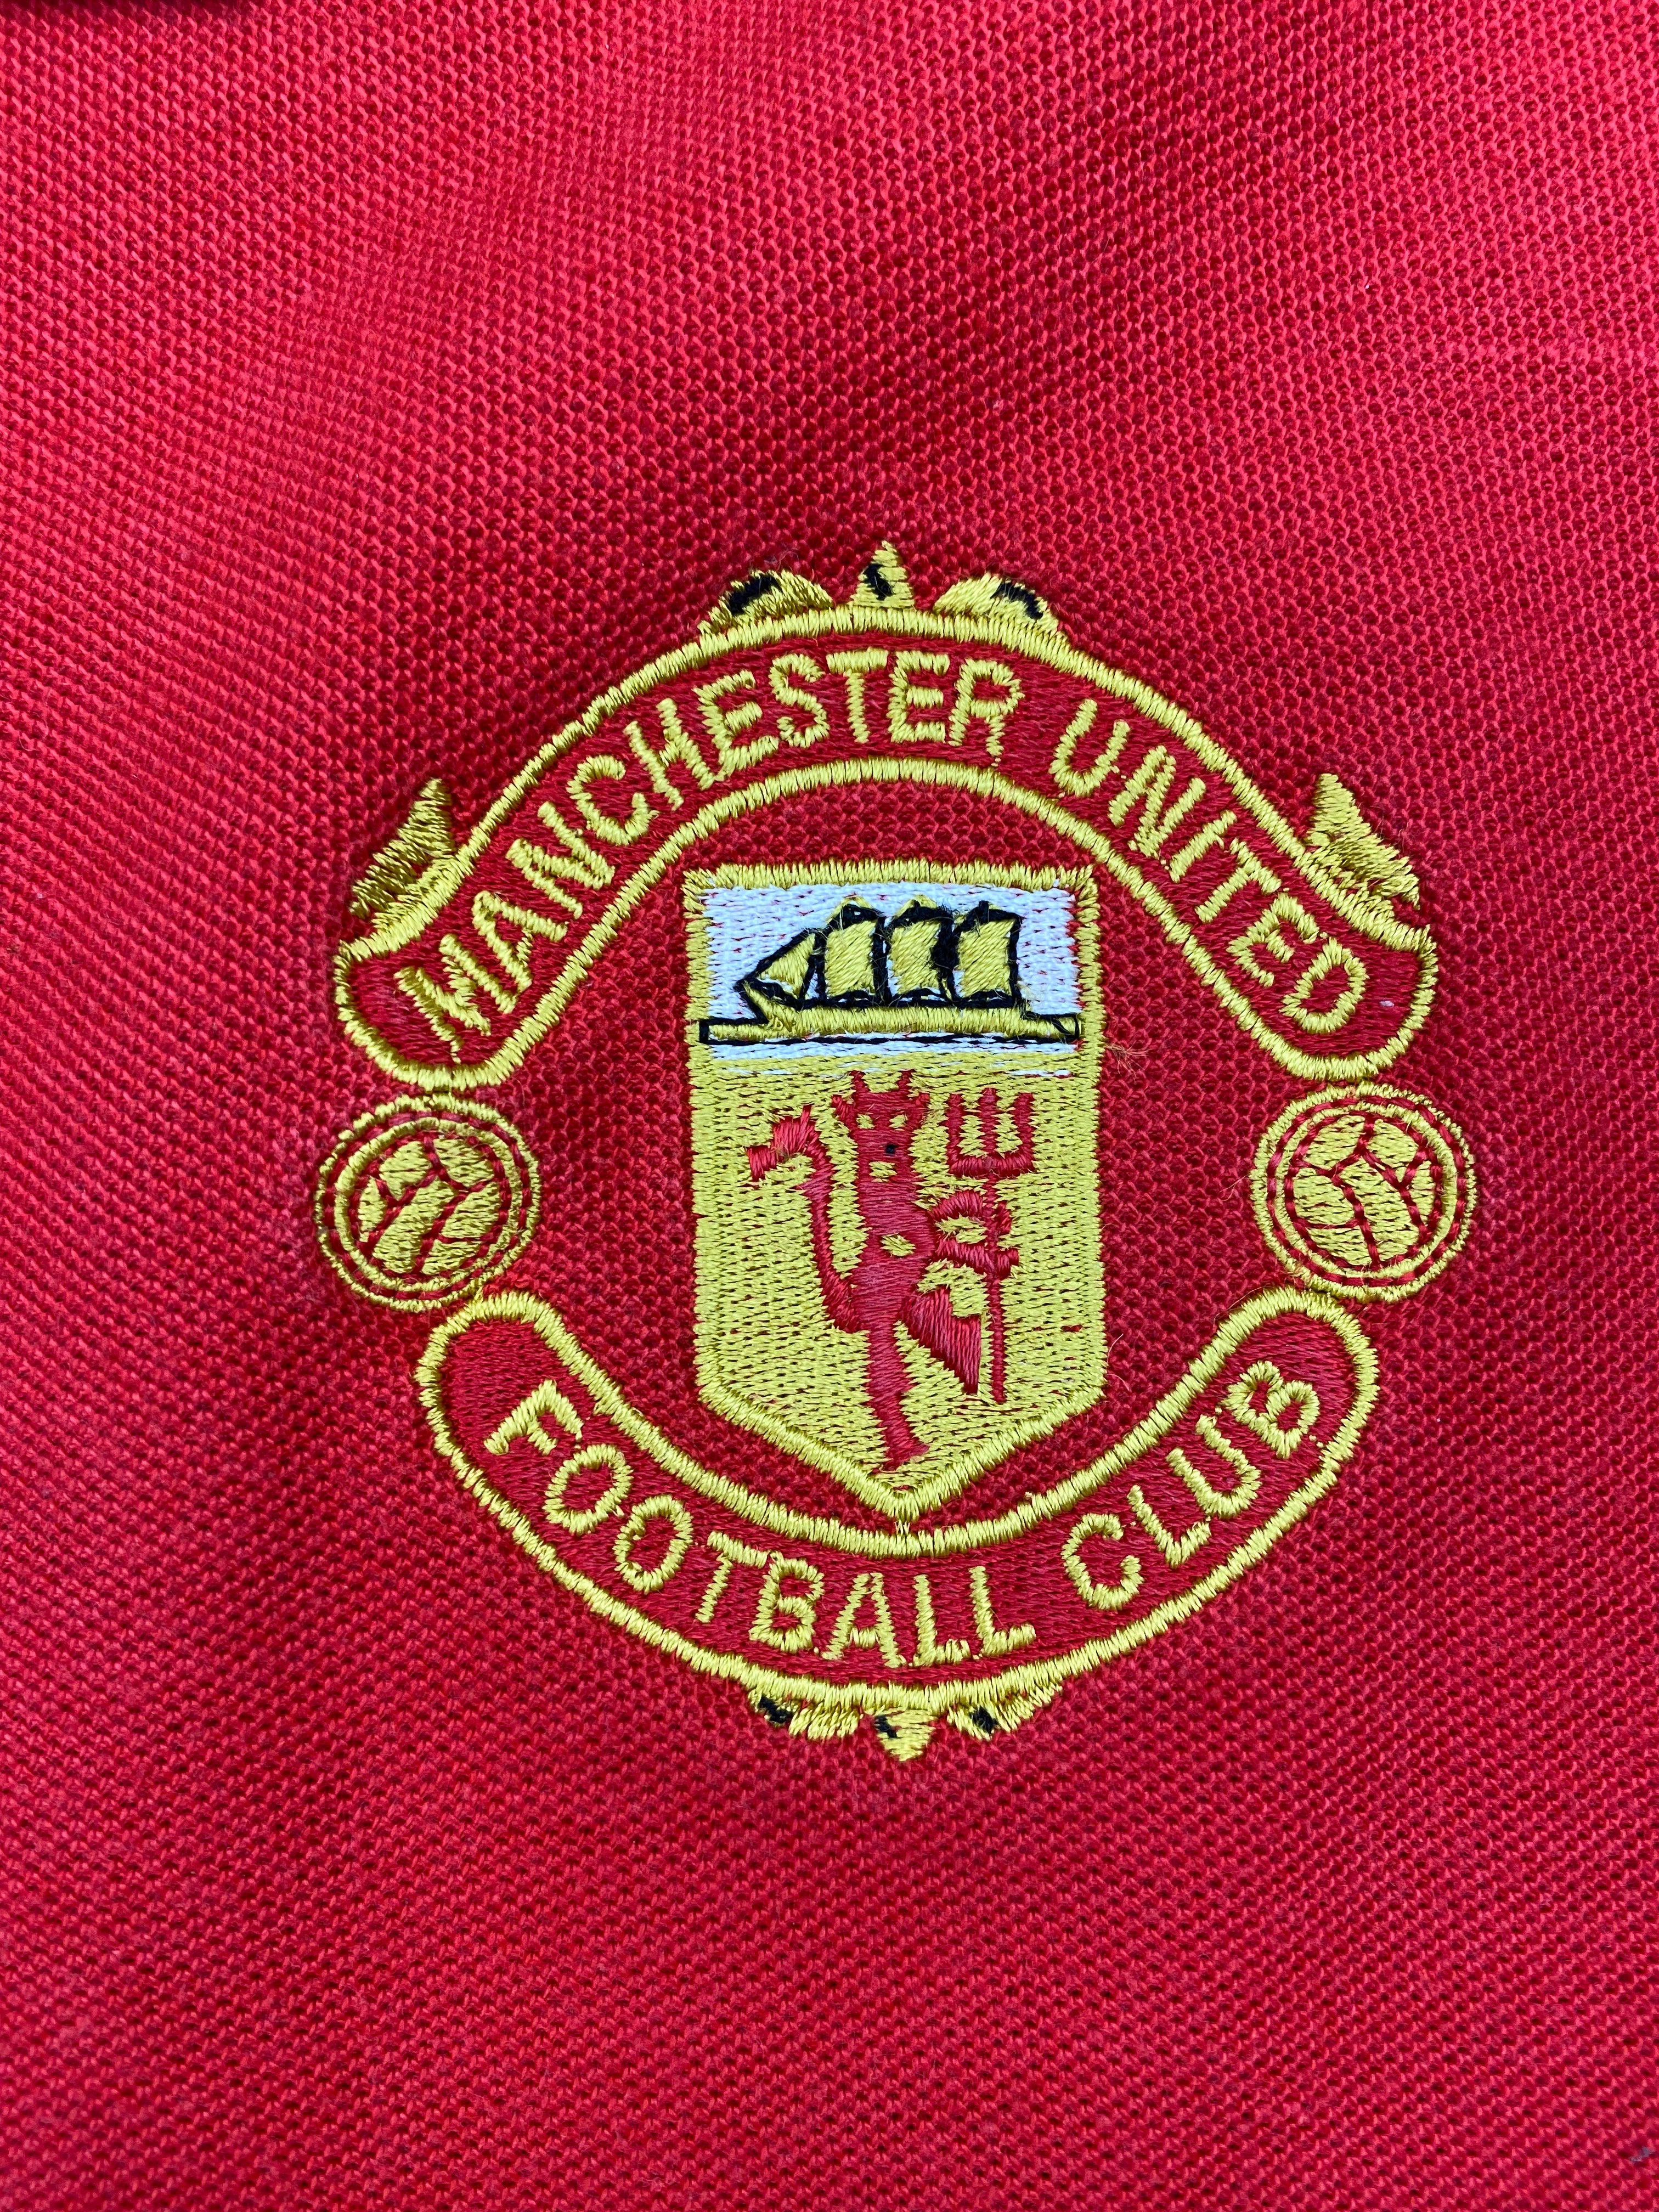 1994/95 Manchester United Polo Shirt (L) 9/10